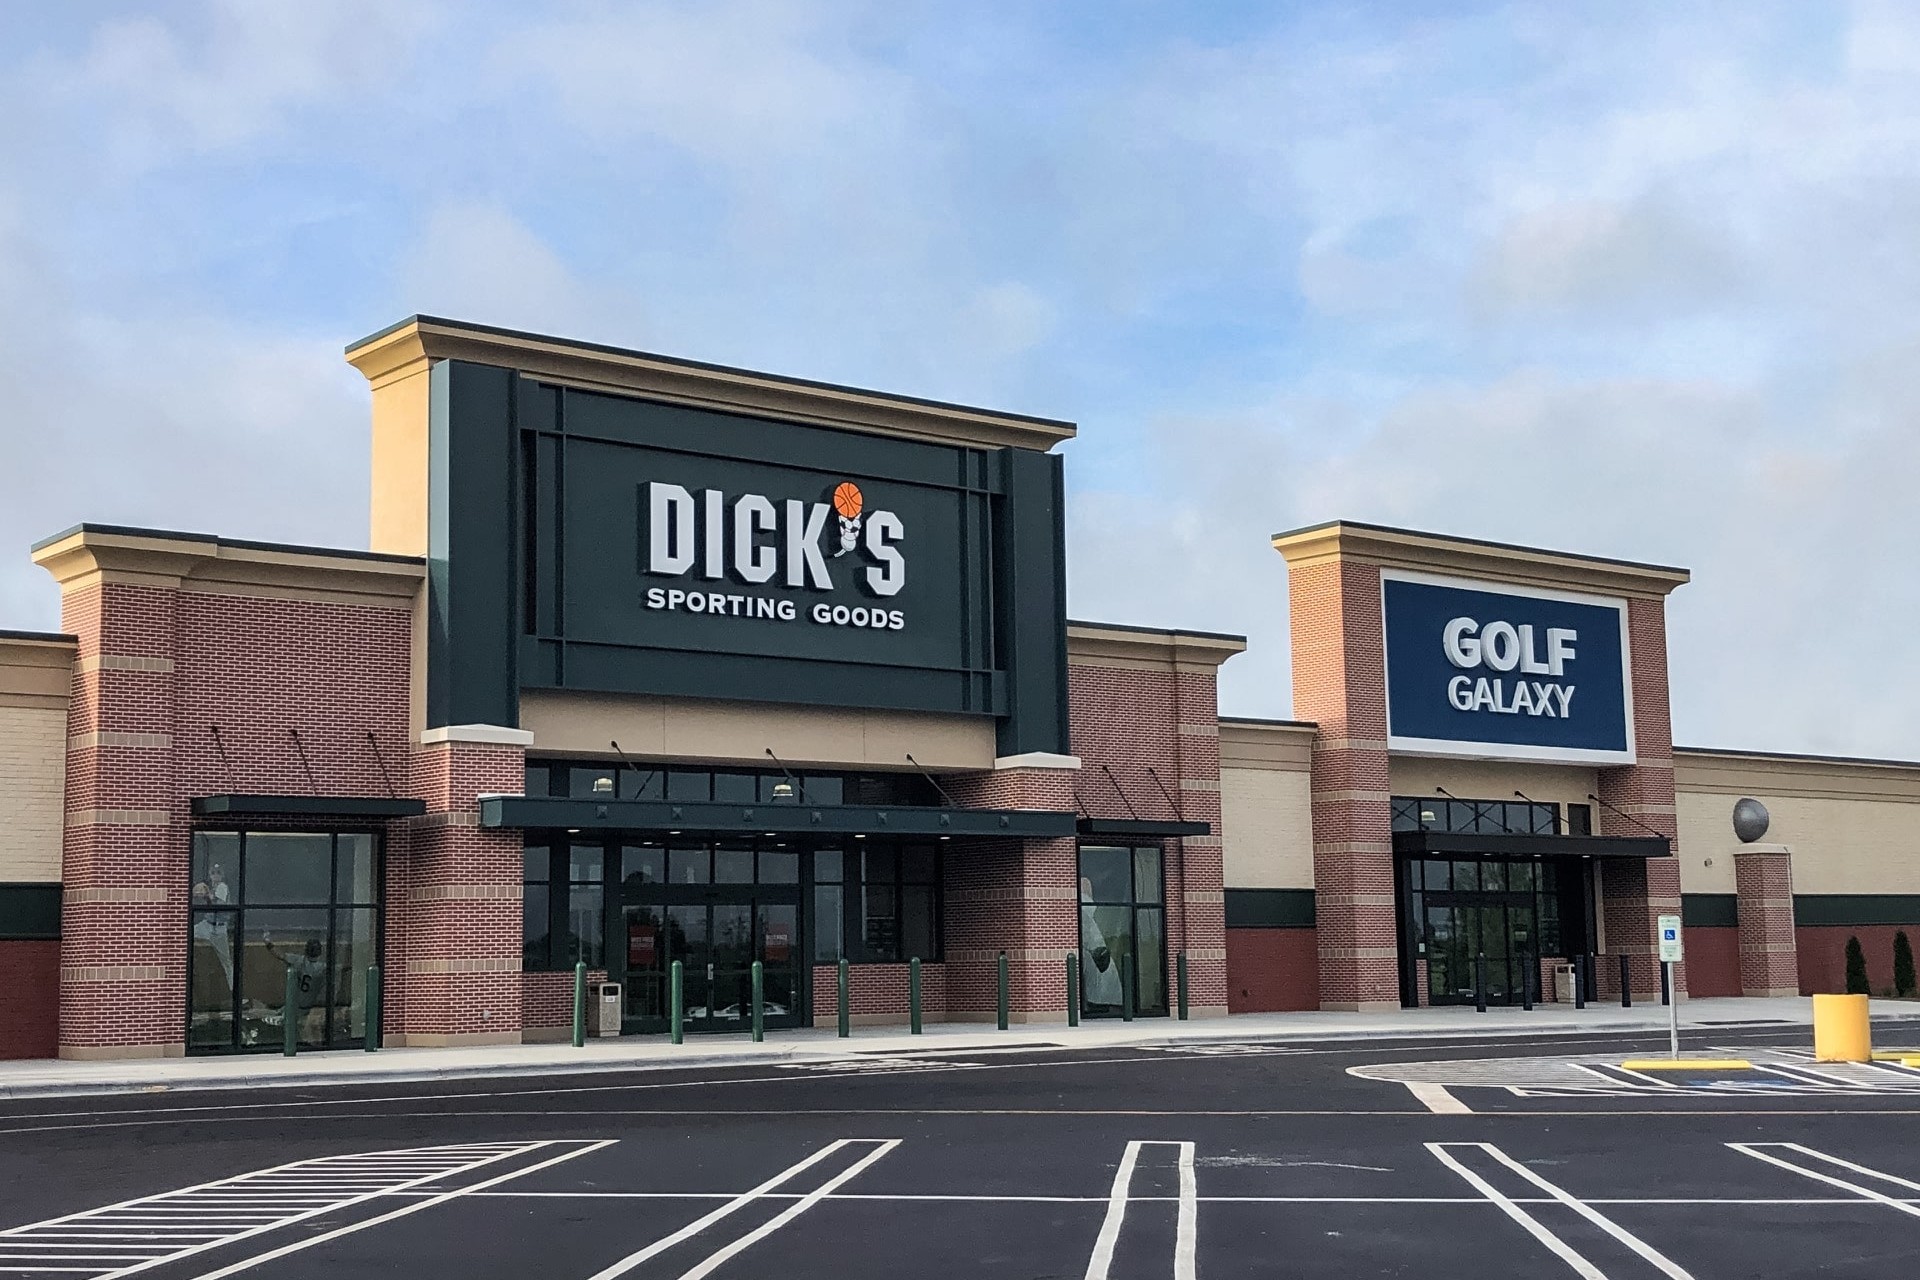 DICK’S Sporting Goods Announces Grand Opening of 11 Stores, the addition of Soccer Shops and its first-ever ScoreCard Appreciation Week in October